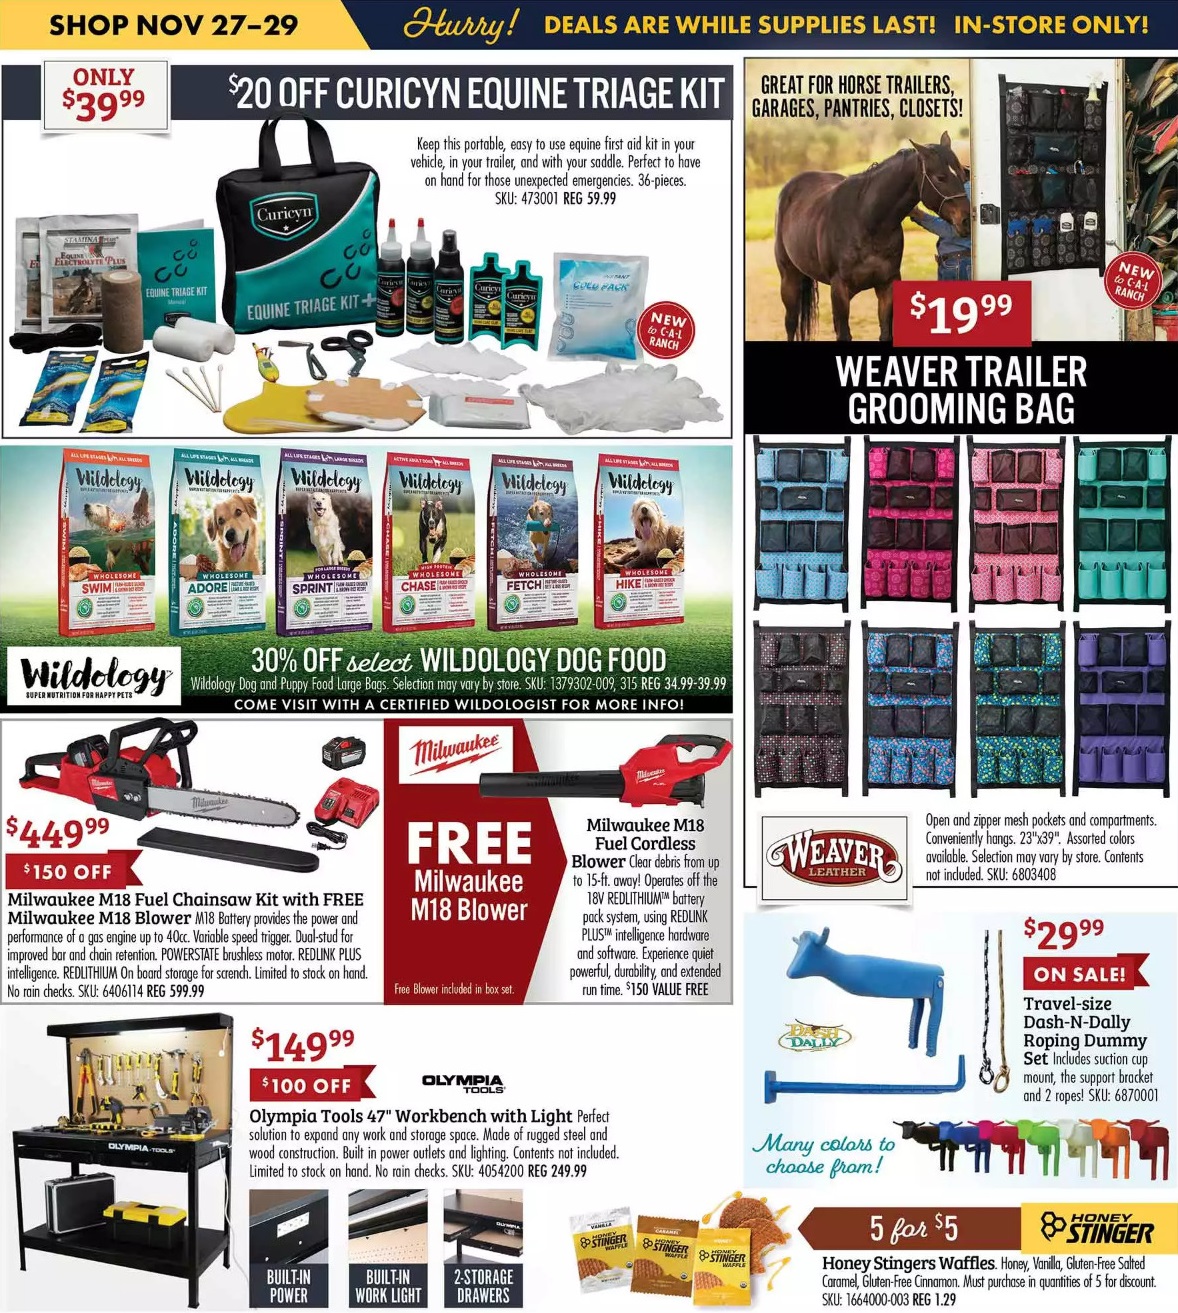 Cal Ranch Stores 2020 Black Friday Ad Frugal Buzz